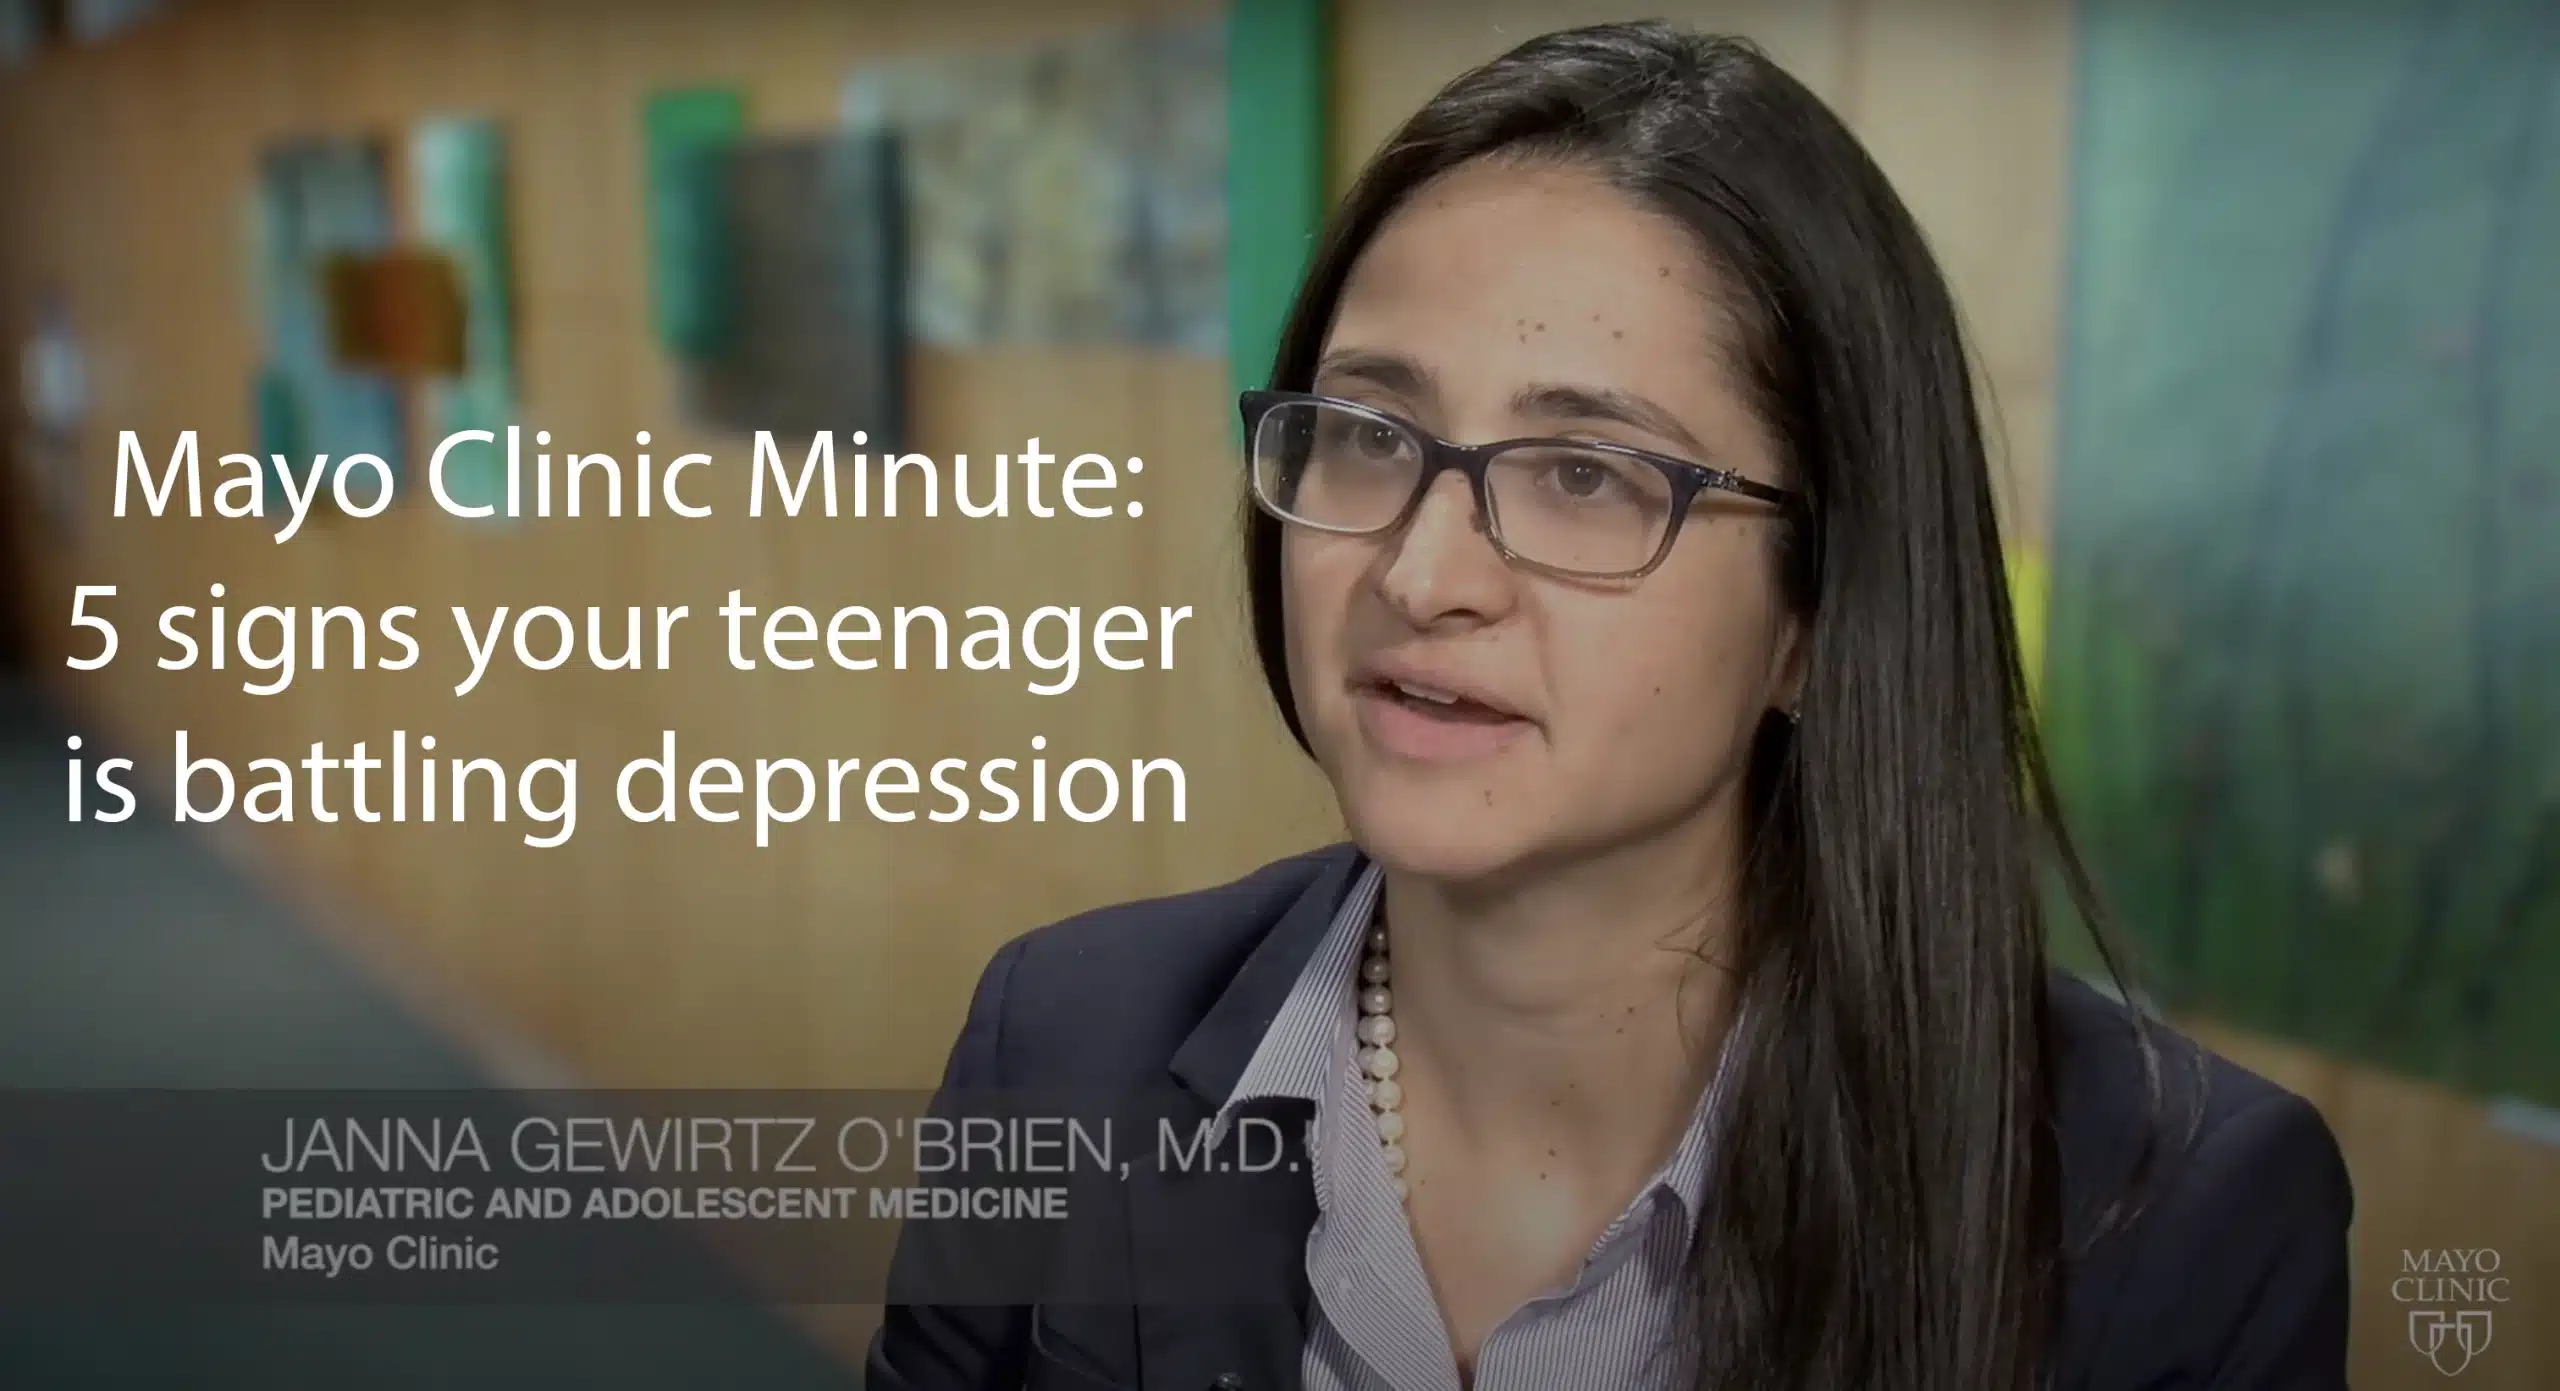 A screenshot from the YouTube video: Mayo Clinic Minute: 5 Signs Your Teenager is Battling Depression